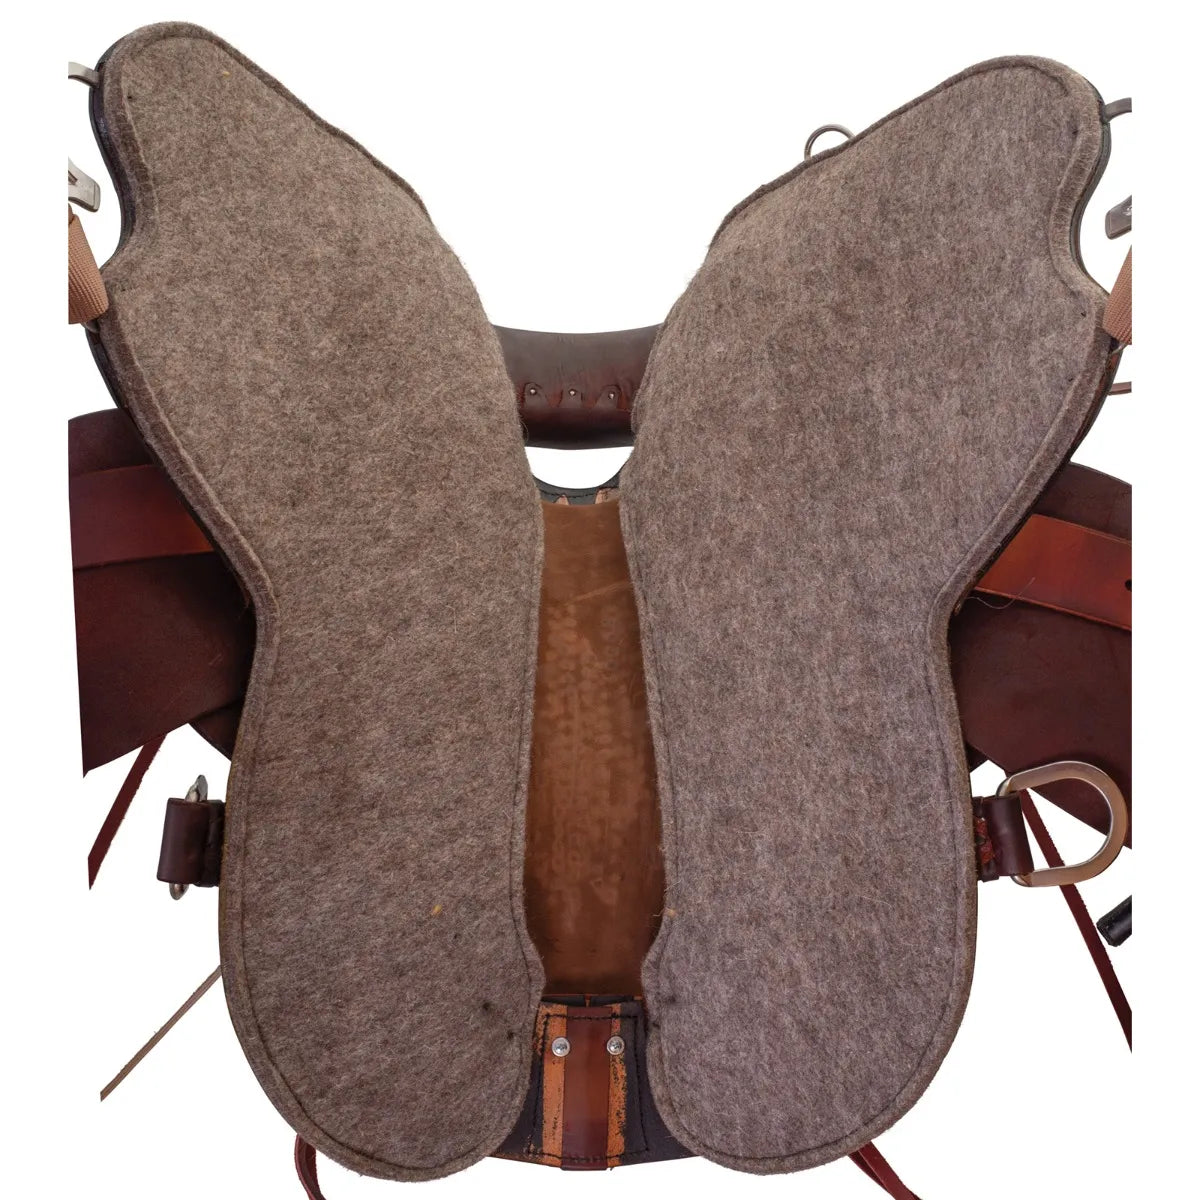 Circle Y High Horse Little River Trail Saddle, 15", Wide